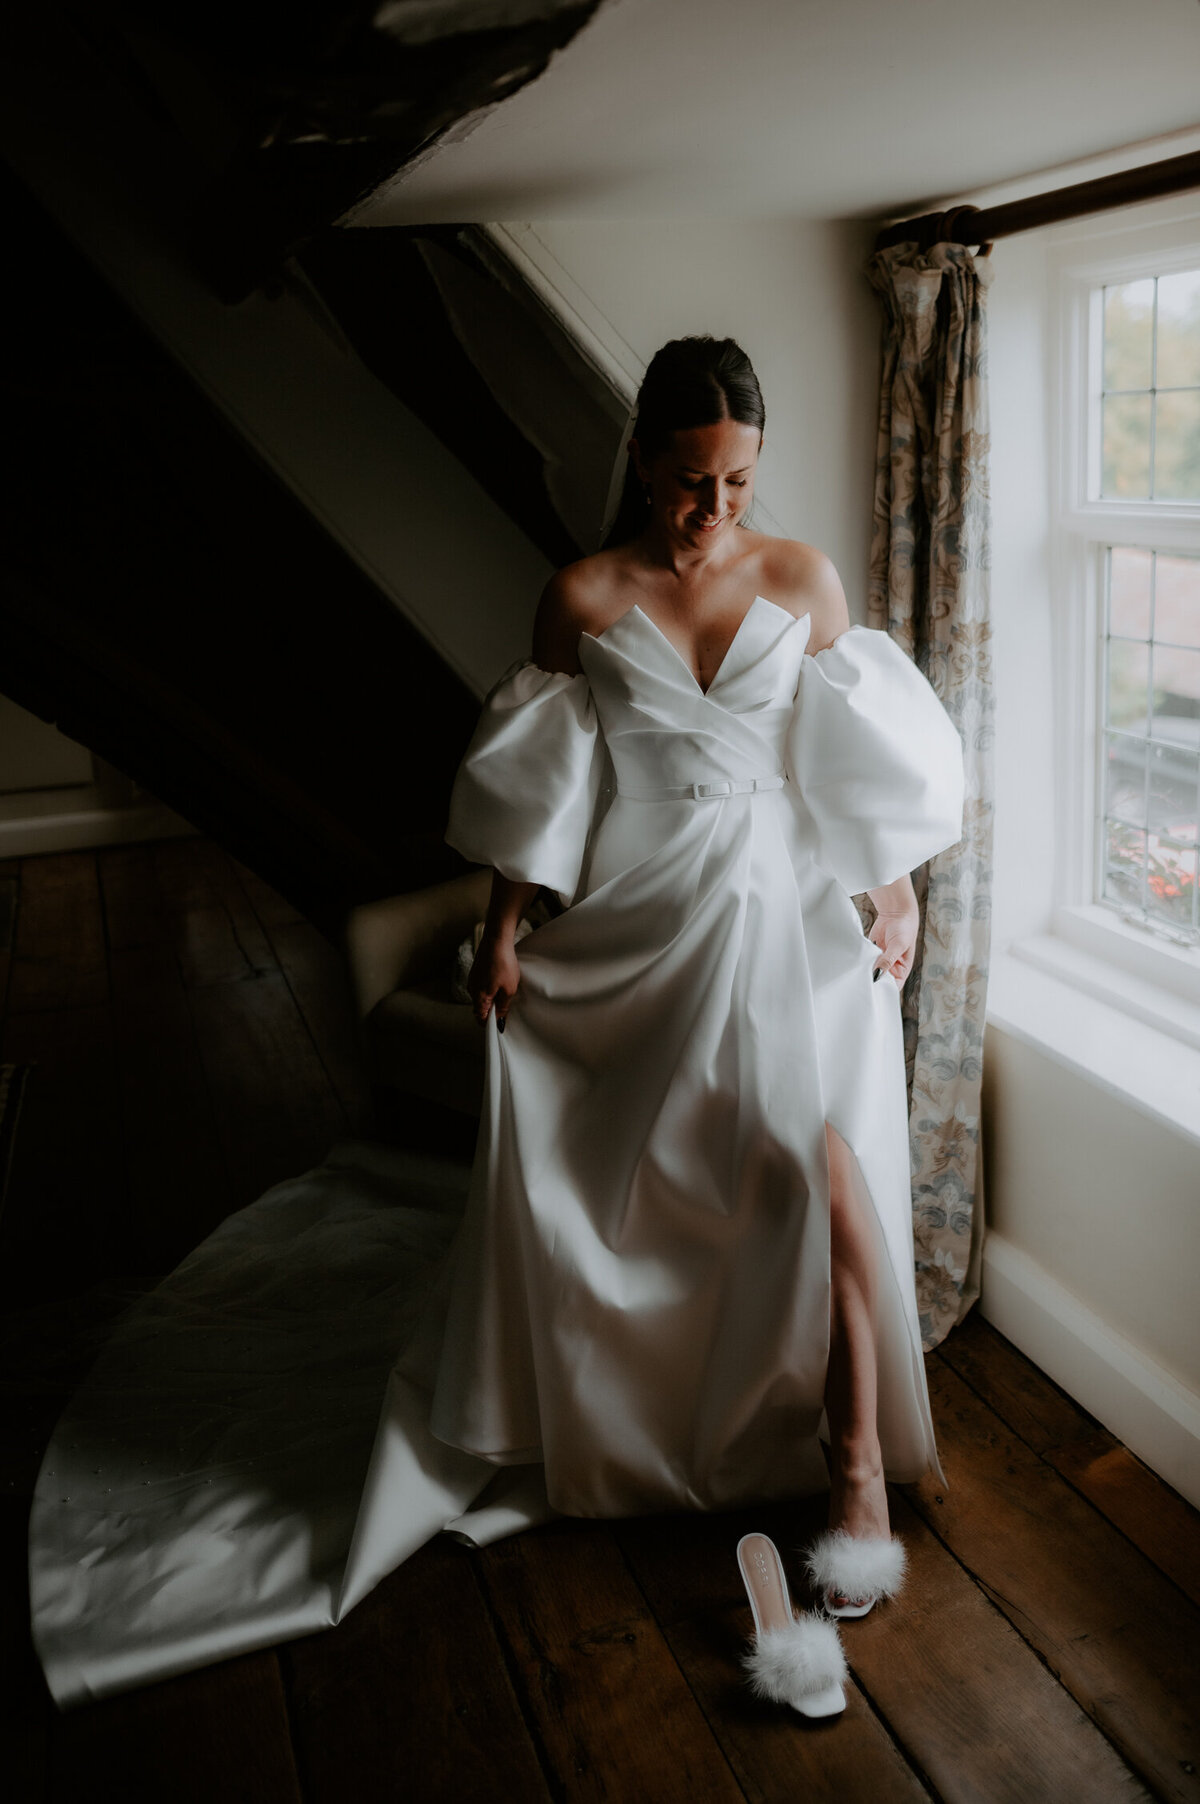 A bride slips into her shoes whilst standing in a window in her wedding dress and bell sleeves.